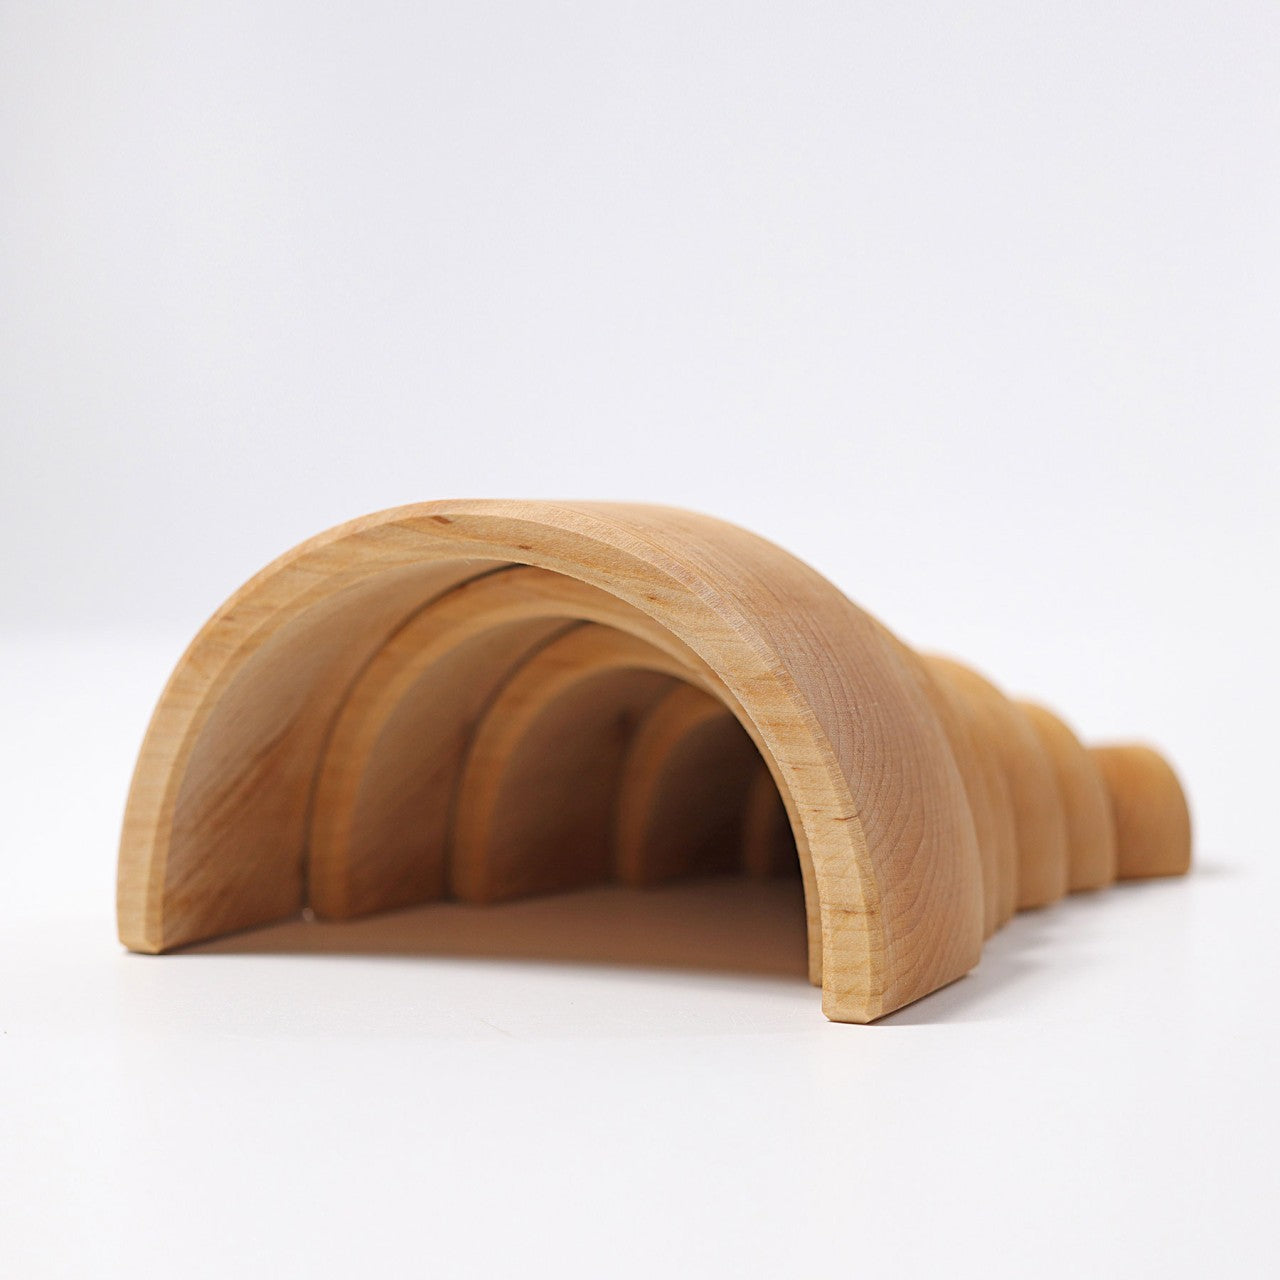 Natural Rainbow | 6 Pieces | Wooden Toys for Kids | Open-Ended Play